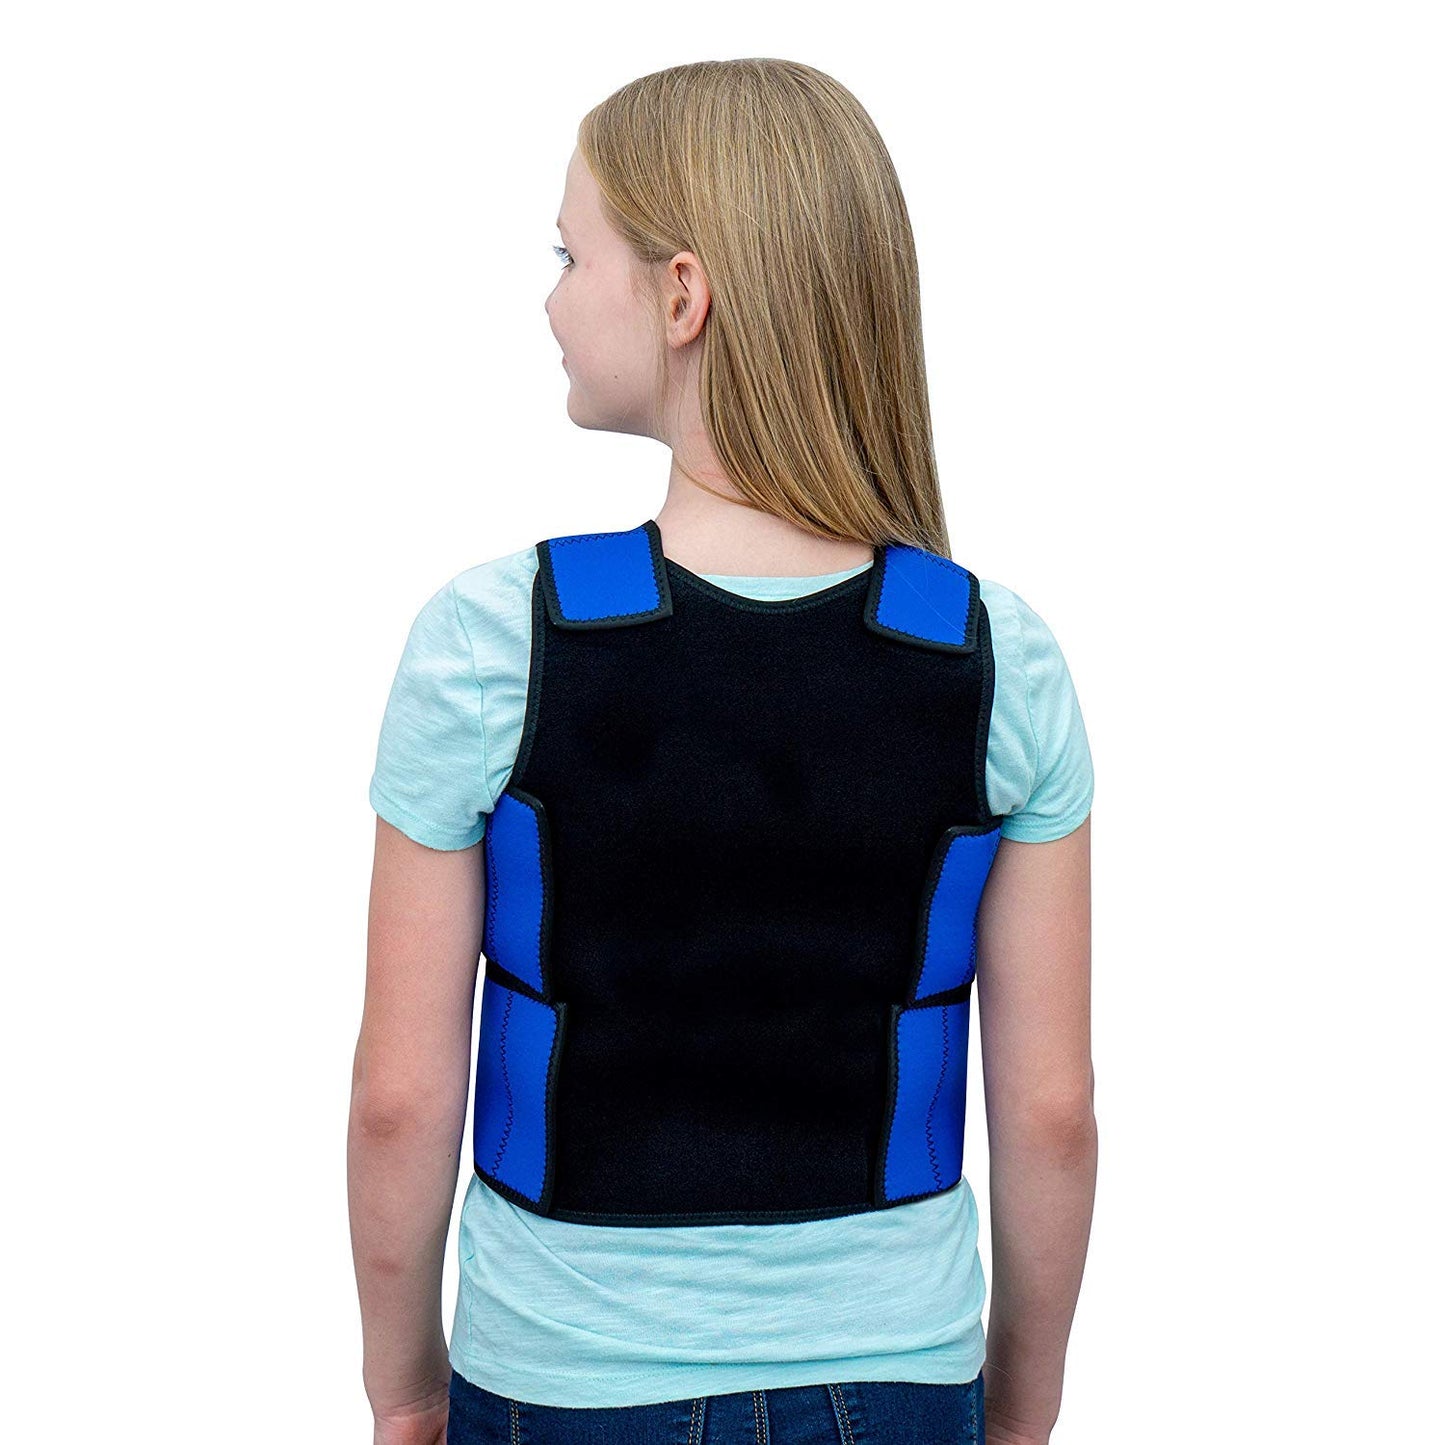 Weighted Sensory Compression Vest for Autism and Hyperactivity, Deep Pressure Vest for Kids with Mood Processing Disorders